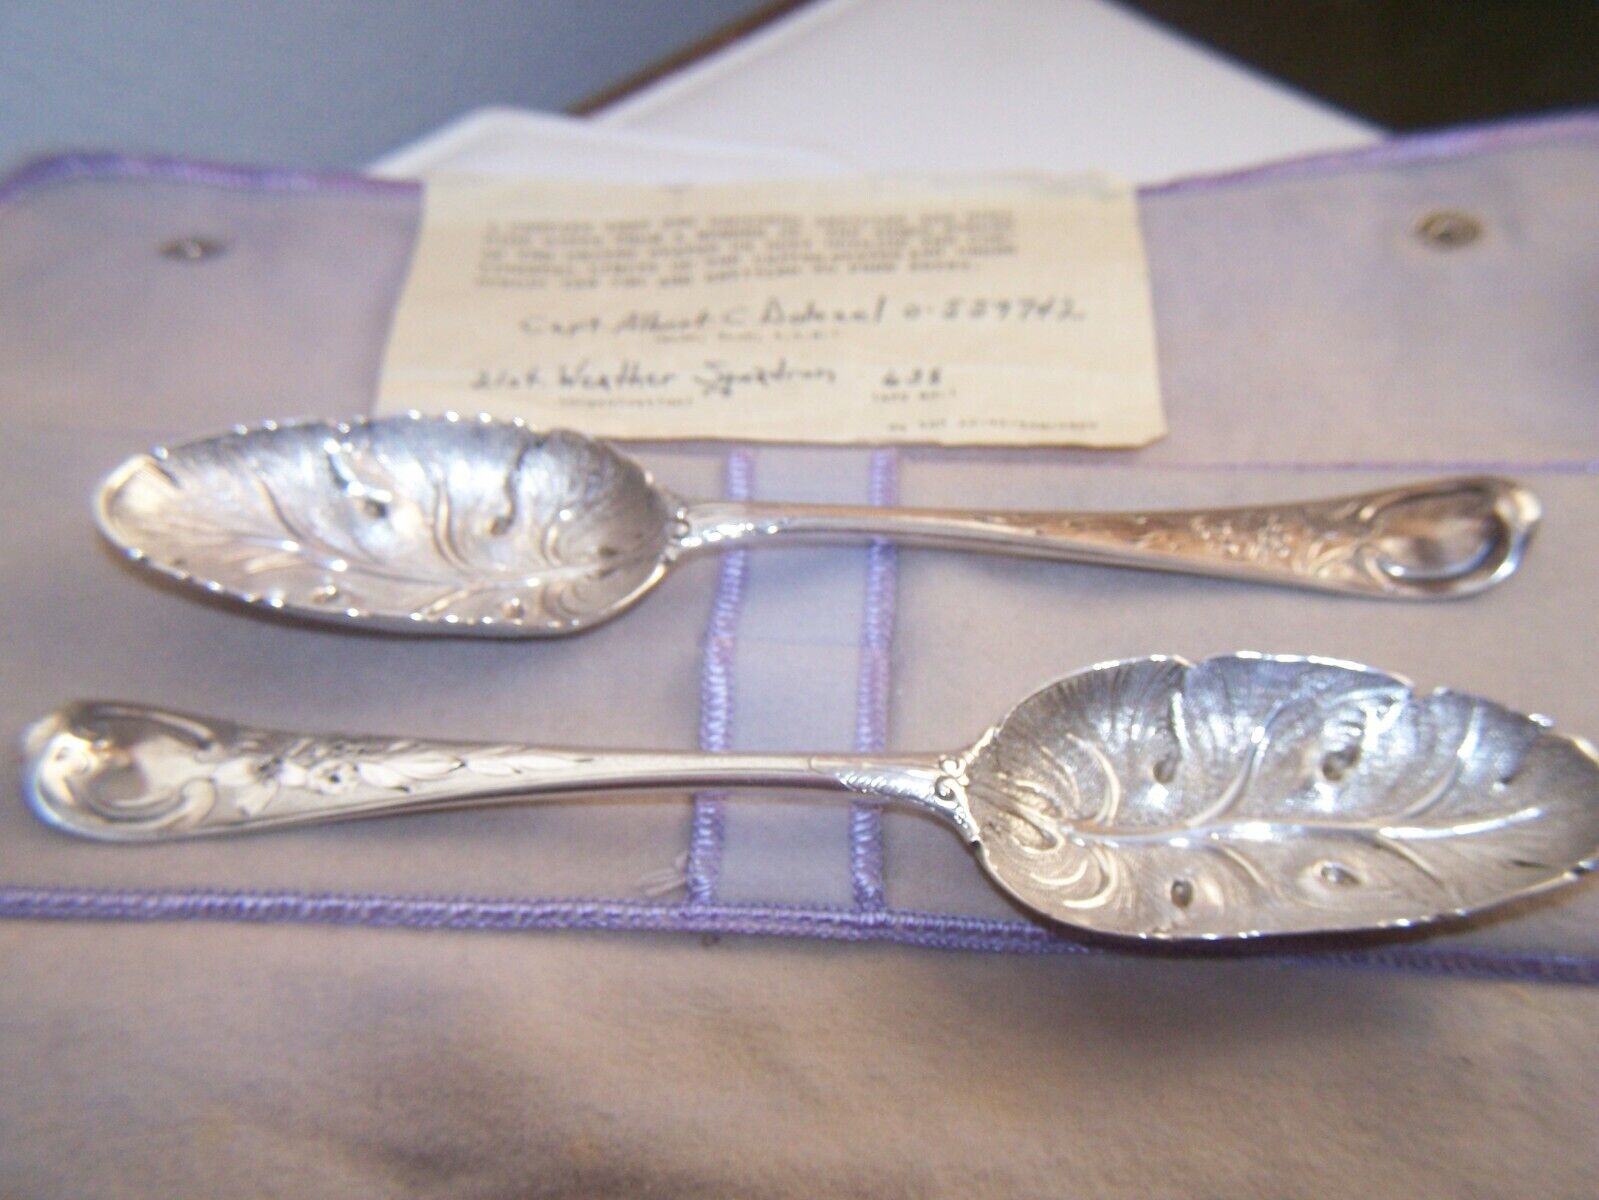 Antique Valuations: ANTIQUE 1700's Silver Spoons Set (2) Berry Repousse 6 Oz 5 English Stamp Marks